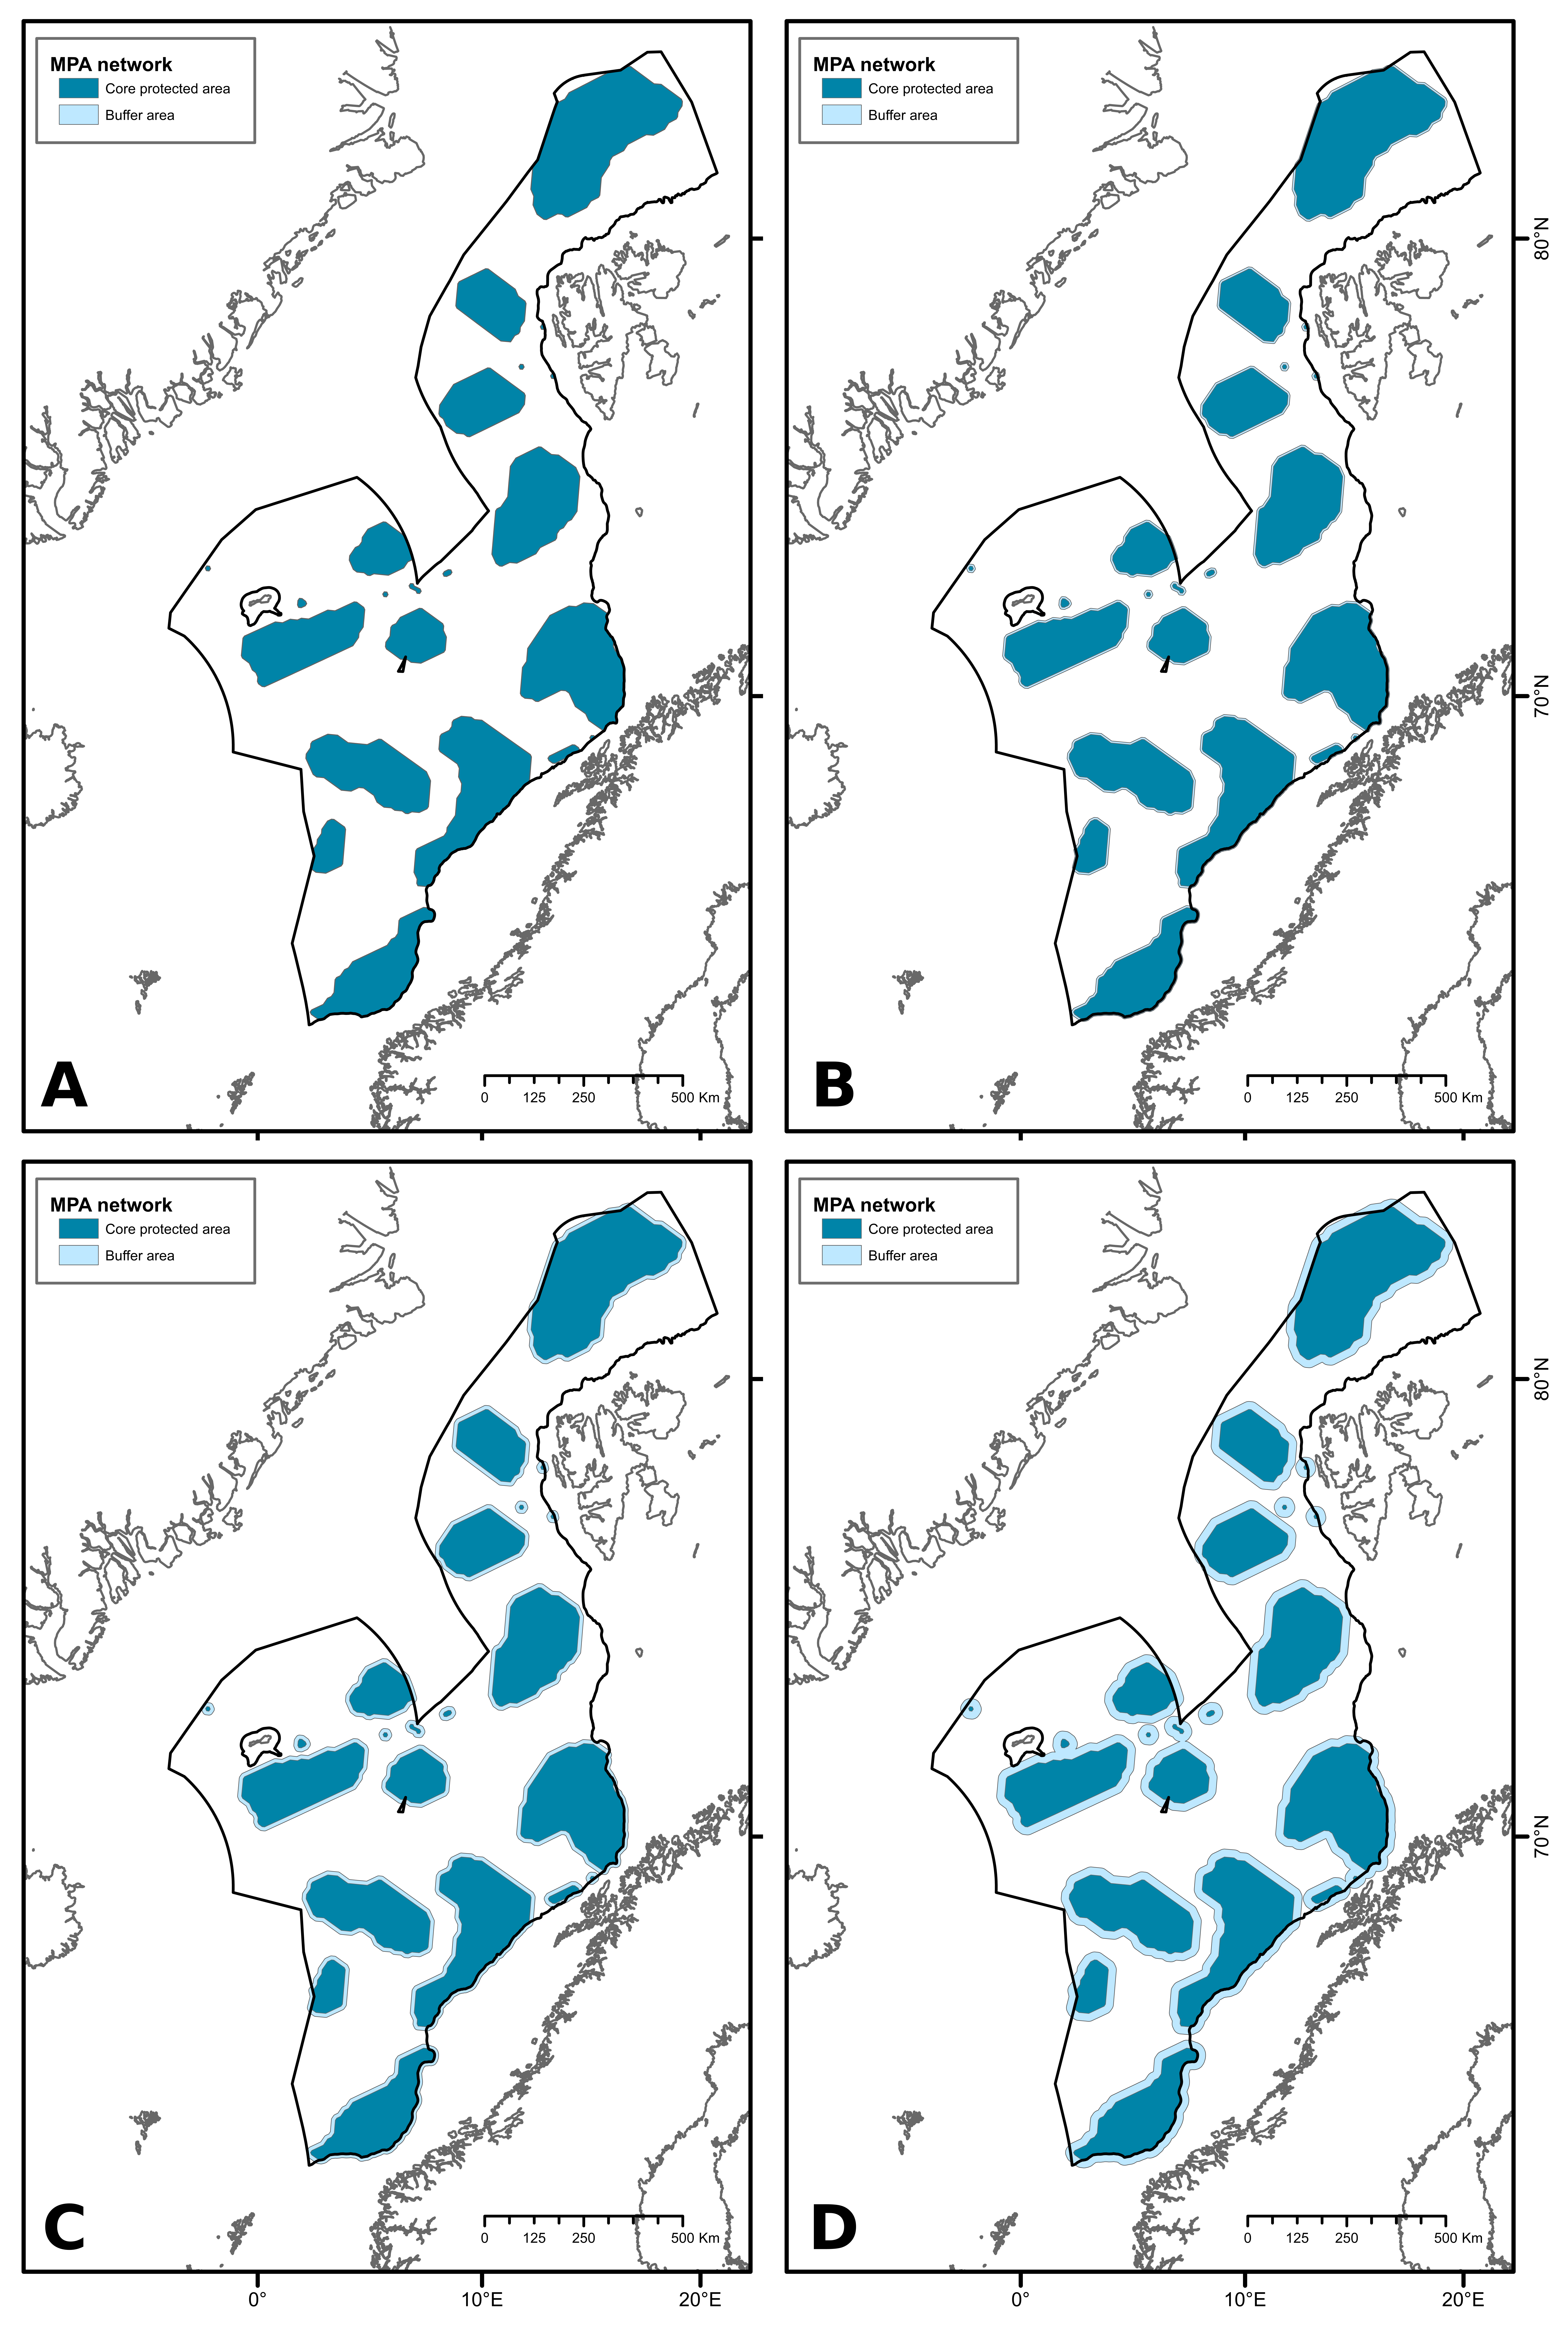 MPA units presented by dark blue areas and the buffer zones in light blue